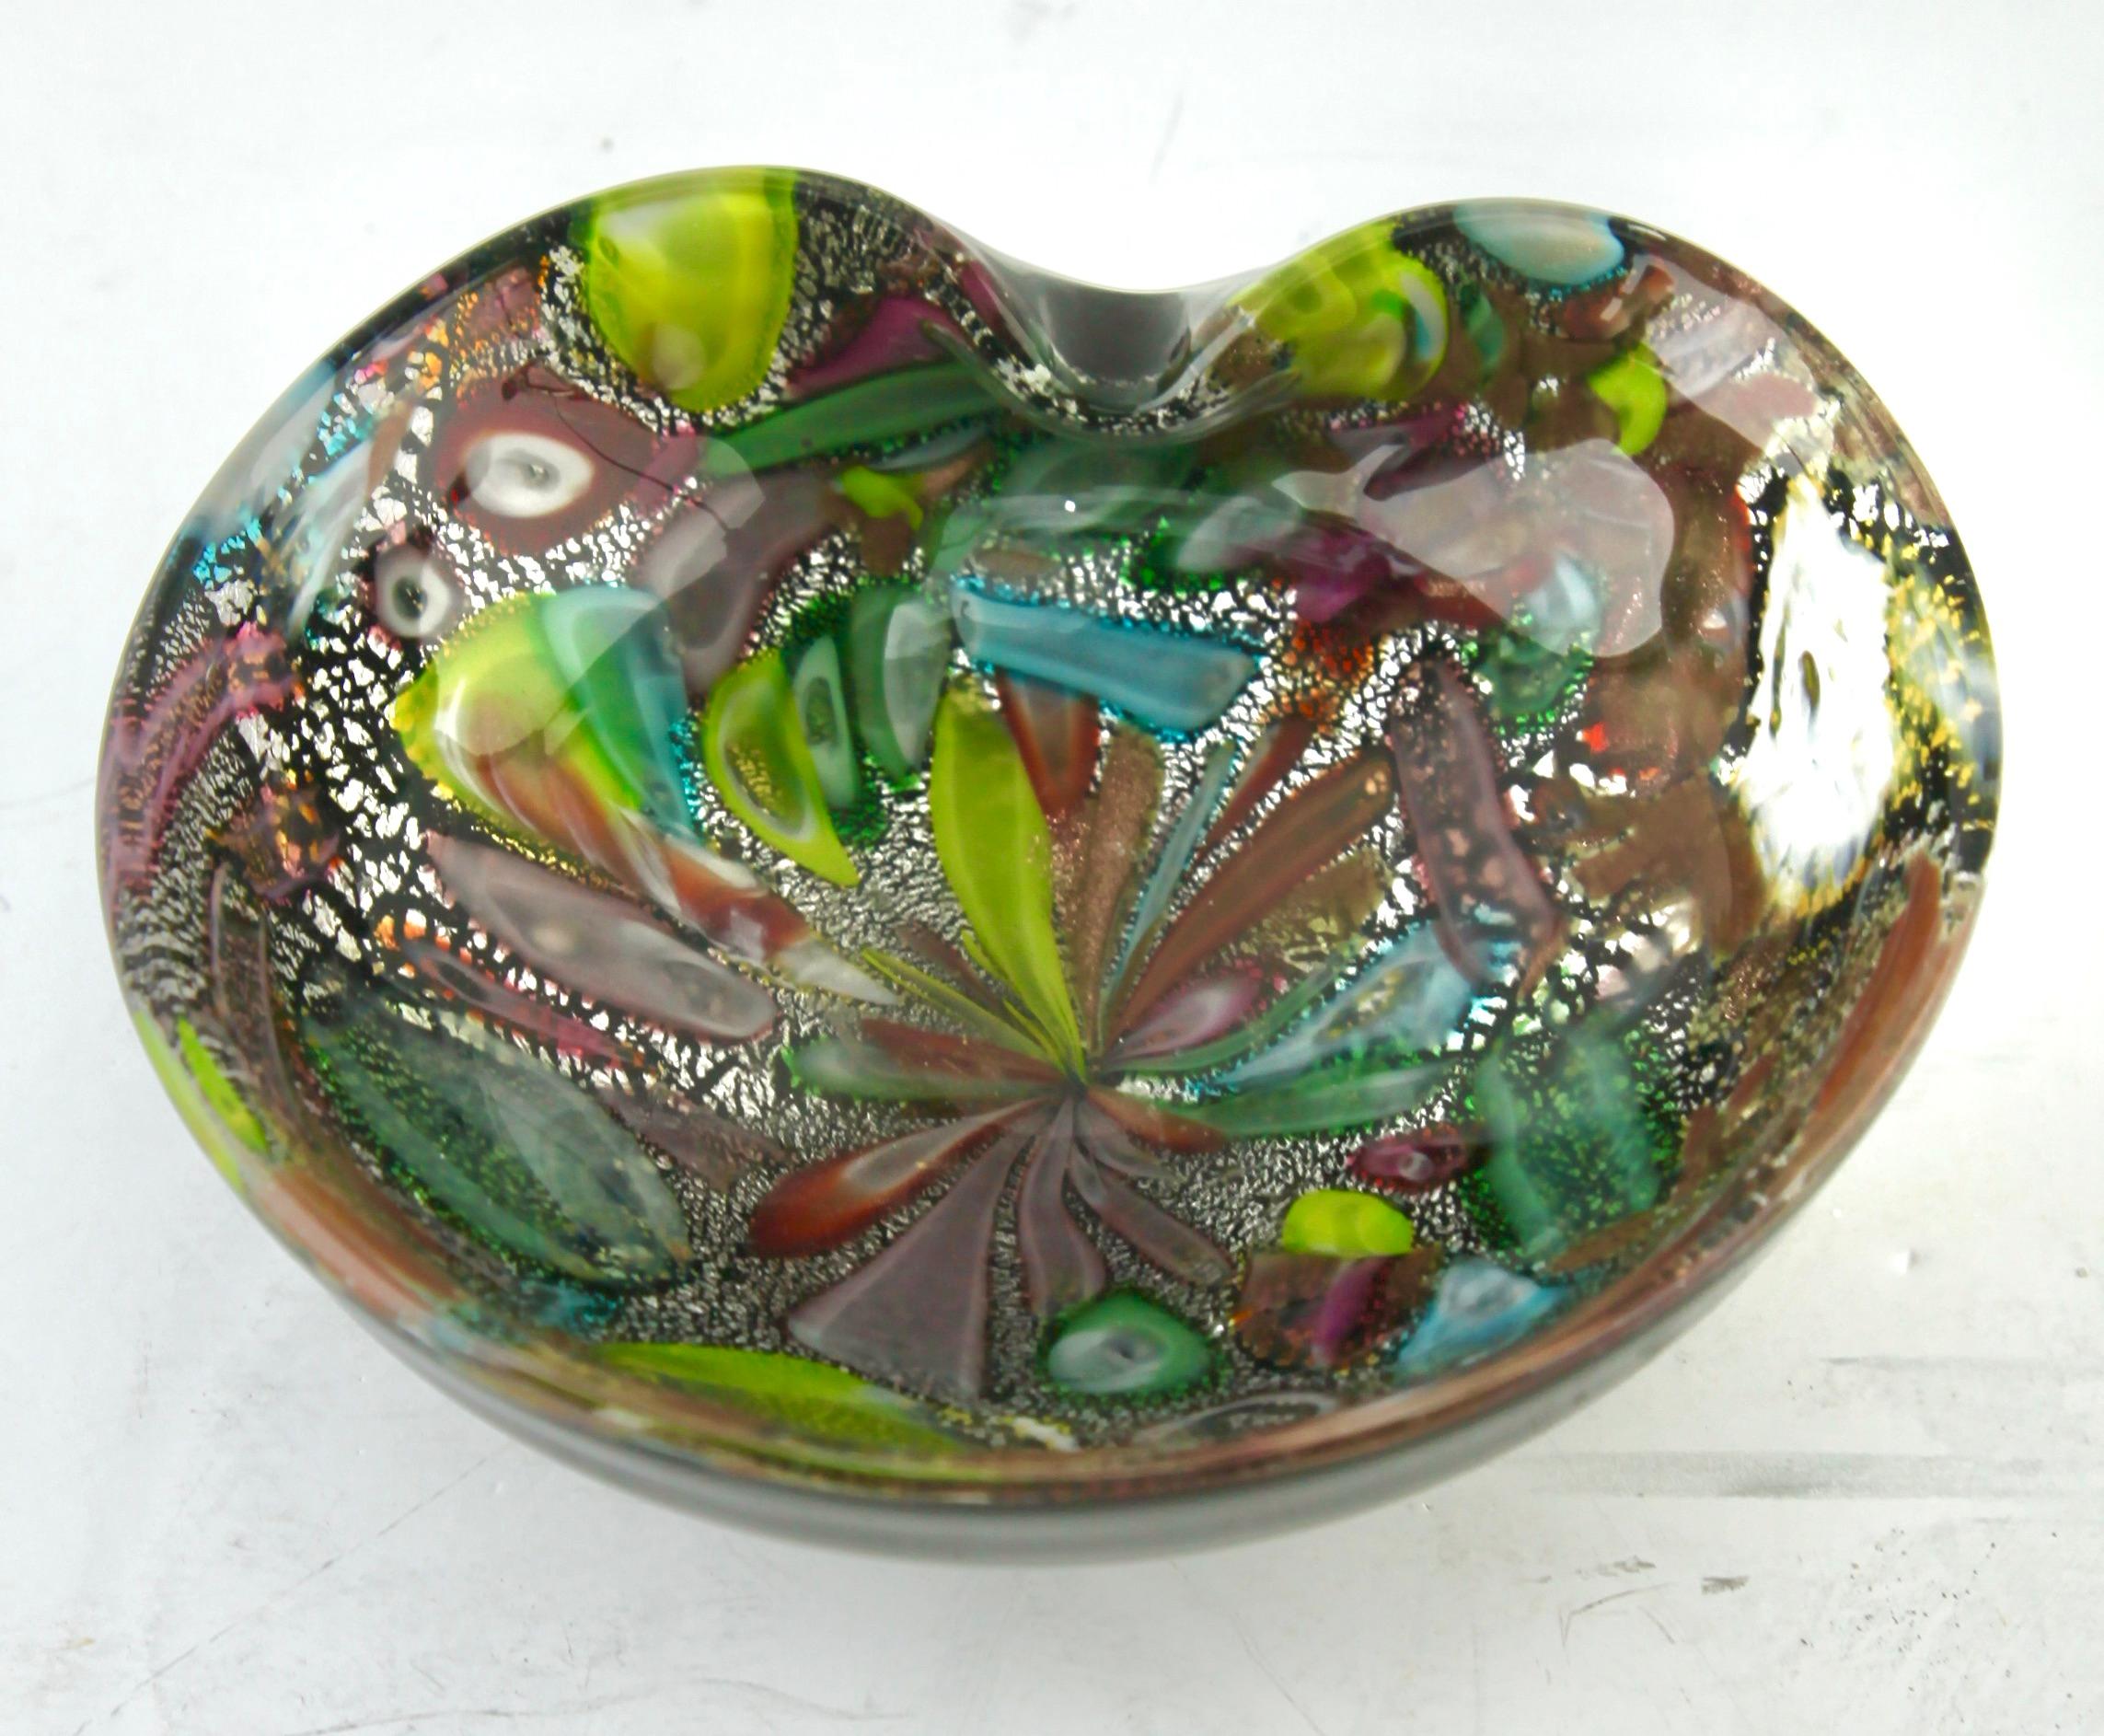 Stylish Murano art glass bowl attributed to AVEM and made in the 1960s. Distinctive black casing on the outside with colorful spatter-glass interior in bright and contrasting colors with silver and copper aventurine inclusions. Polished